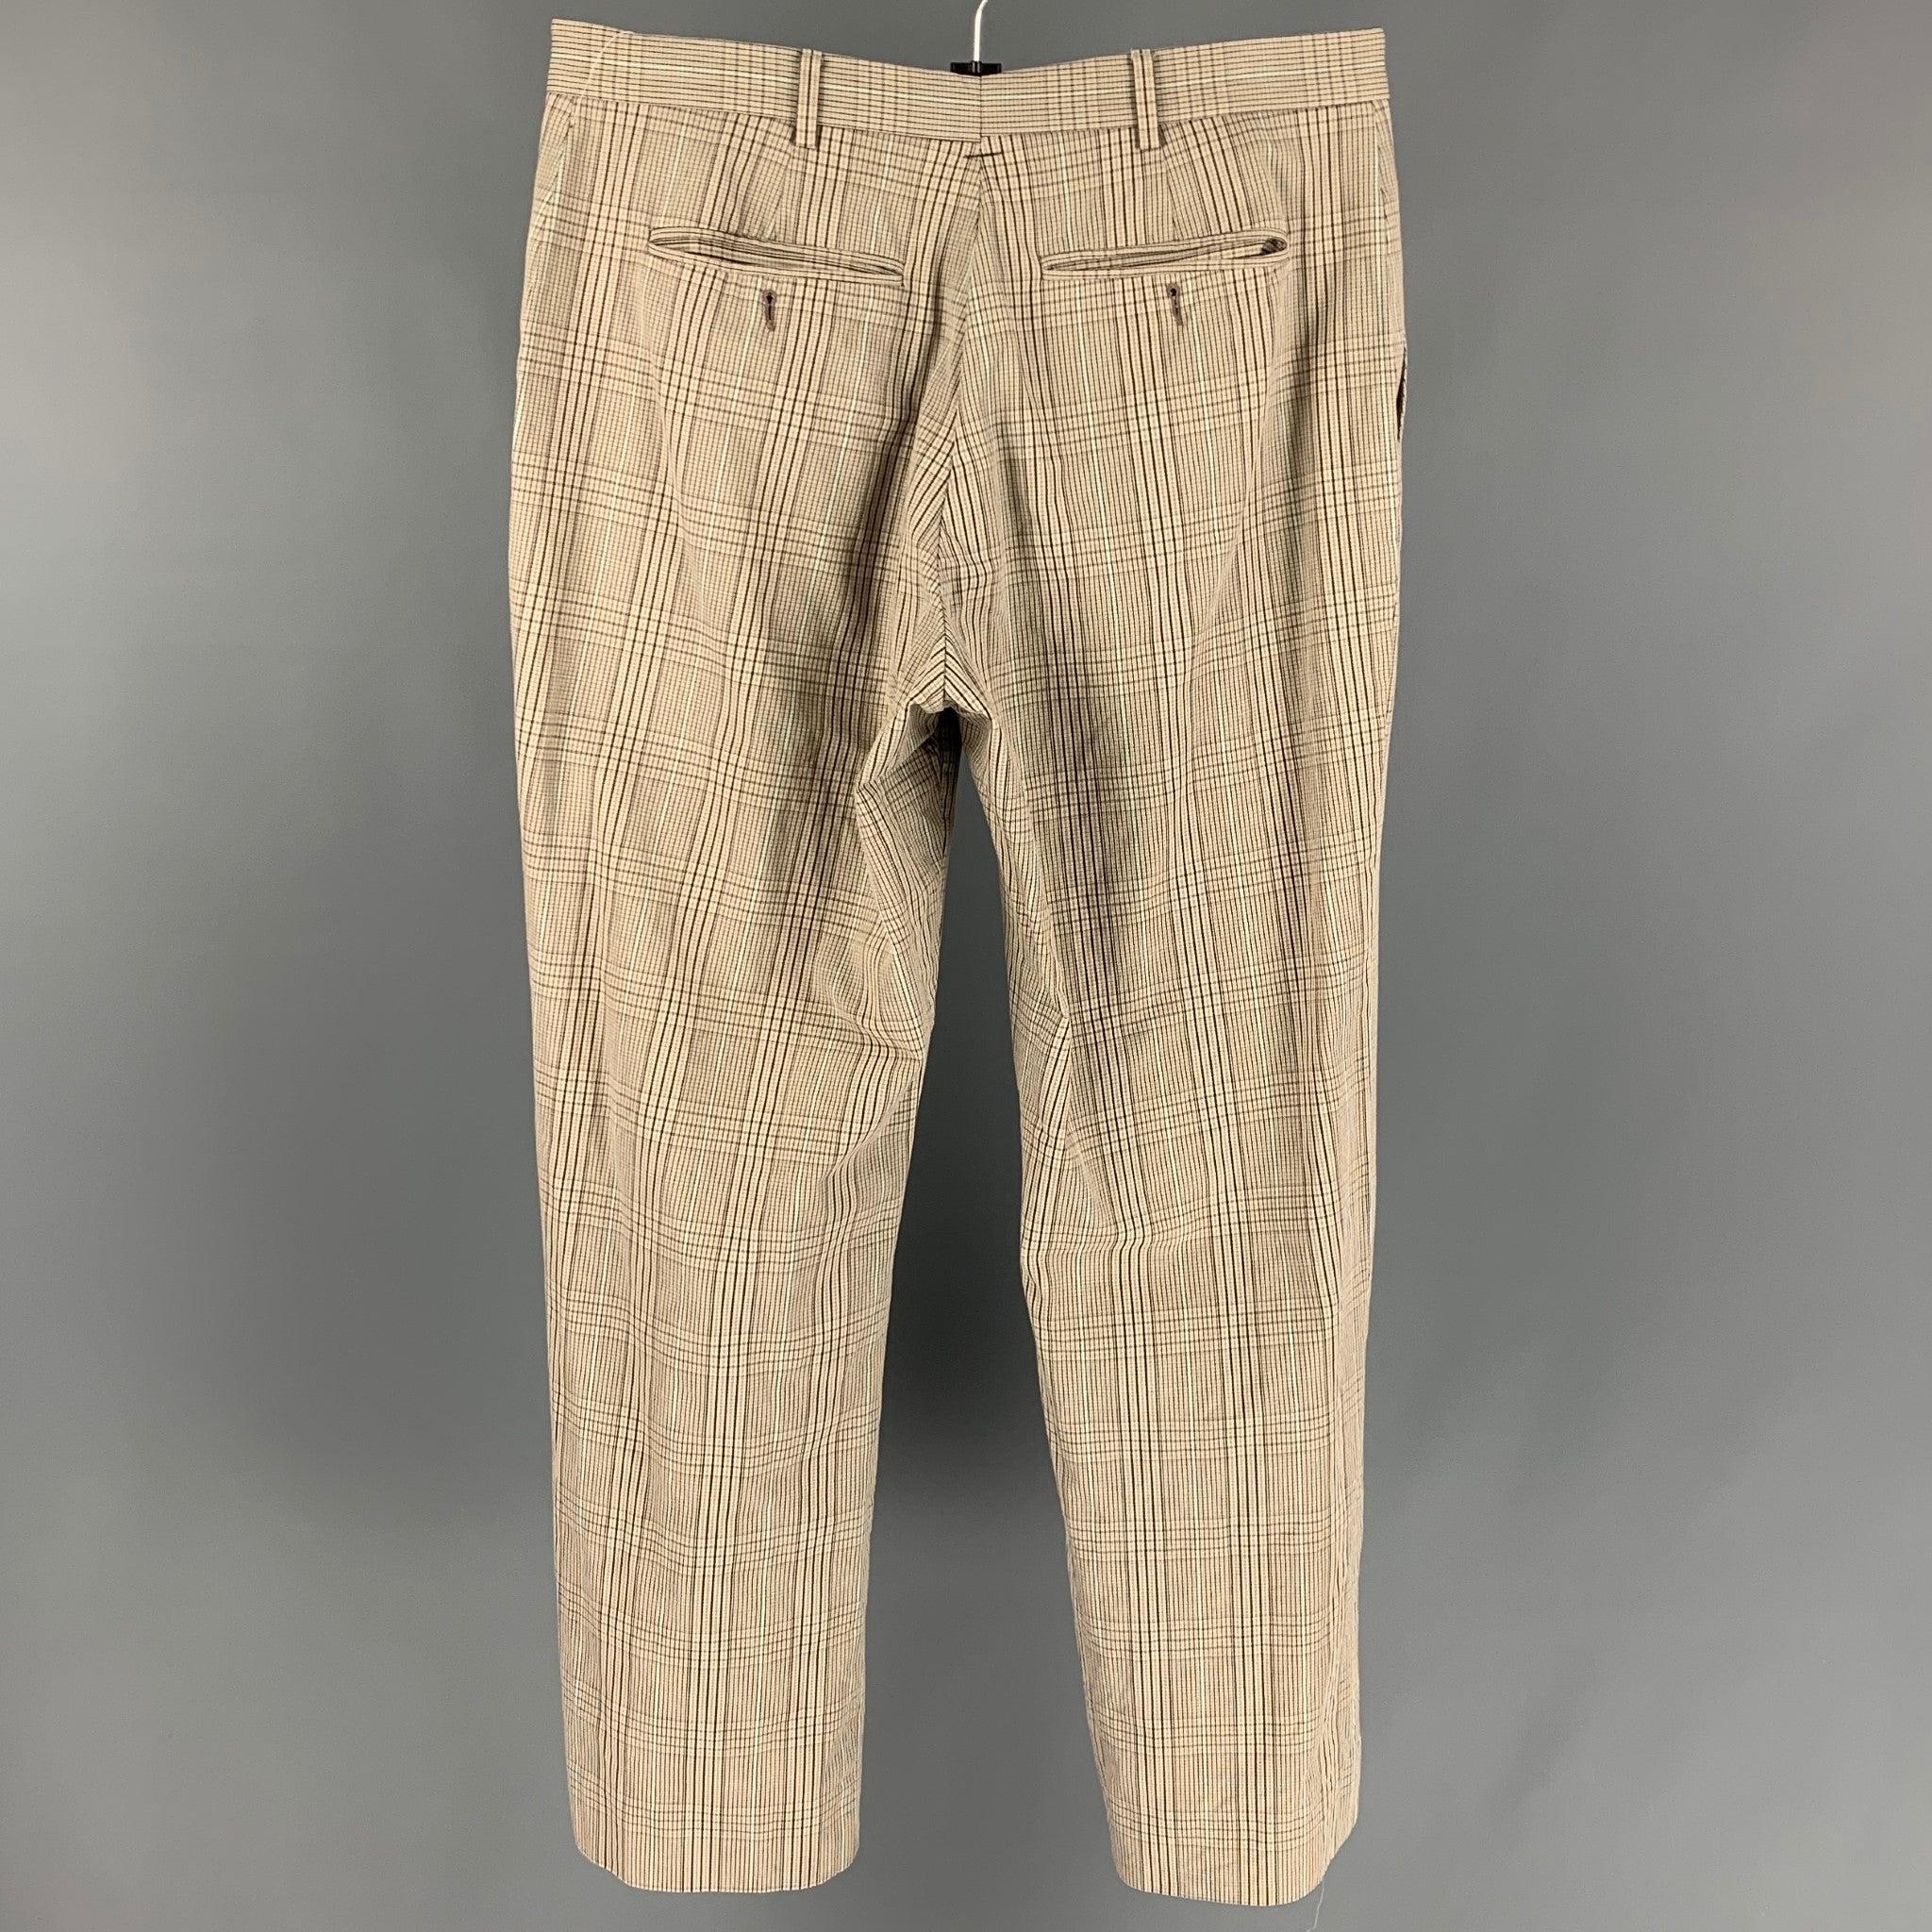 PAUL SMITH dress pants comes in a taupe & brown plaid cotton featuring a flat front, front tab, and a zip fly closure.
Very Good
Pre-Owned Condition. 

Marked:   36 

Measurements: 
  Waist: 32 inches  Rise: 11.5 inches  Inseam: 30 inches 
  
  
